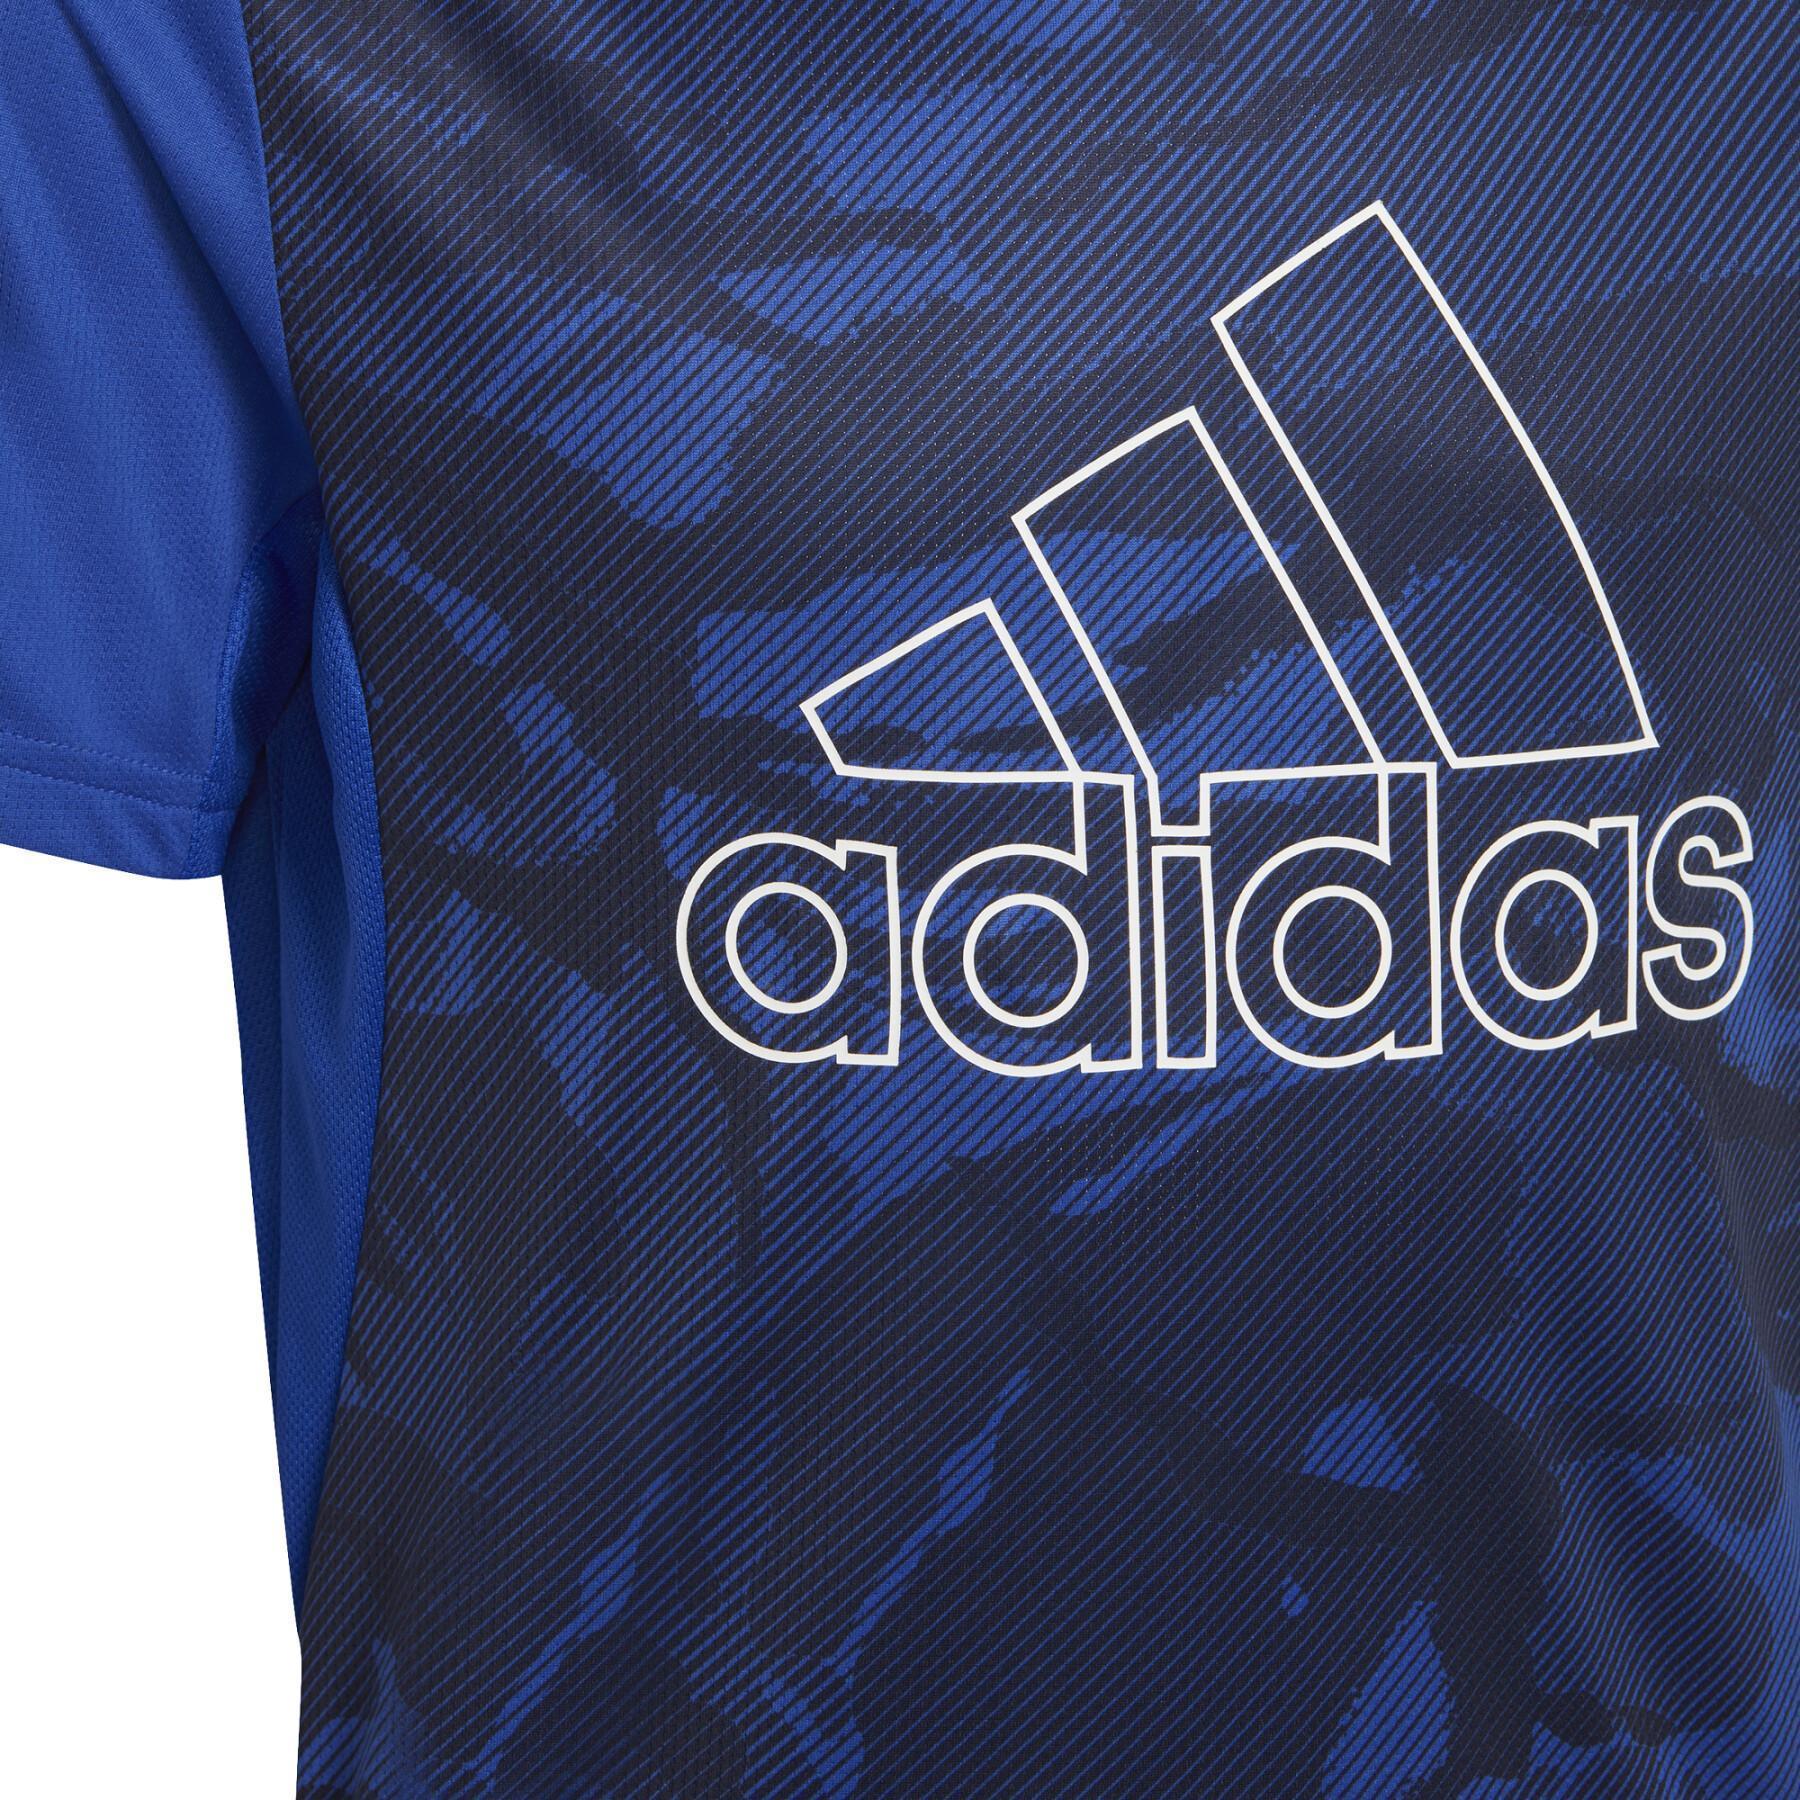 Kinder-T-Shirt adidas Designed To Move Graphic